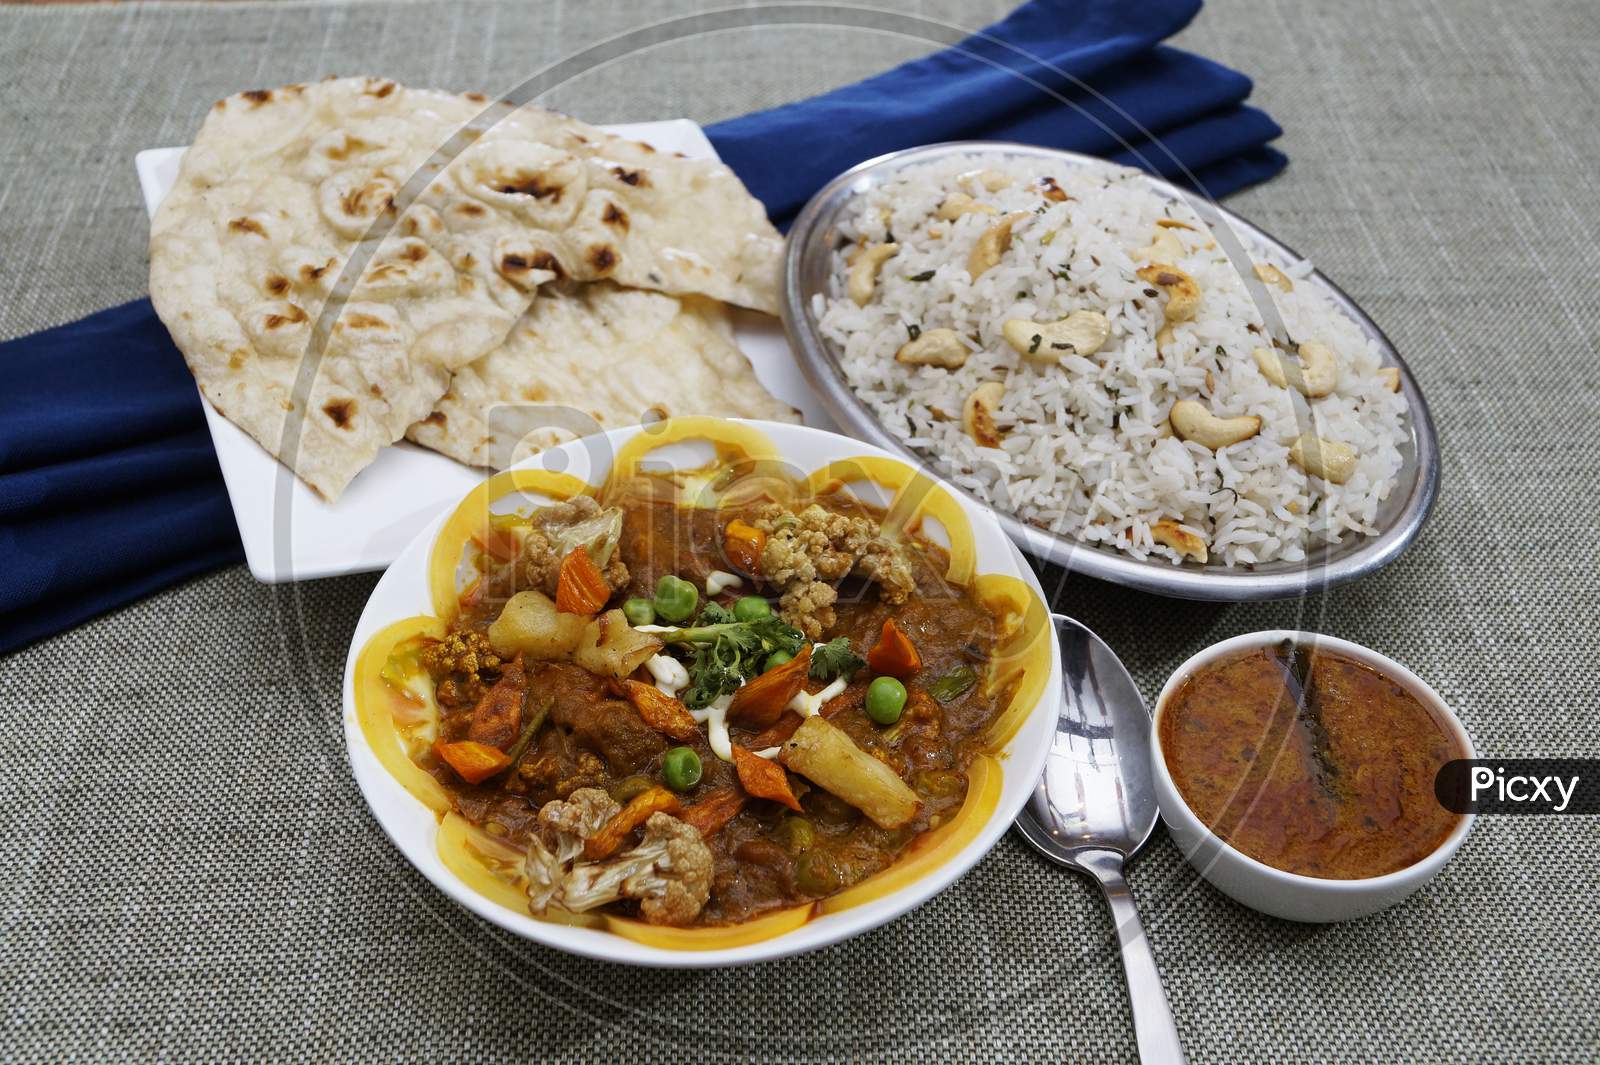 Mix Vegetable Curry, Vegetable Pulao, Butter Naan